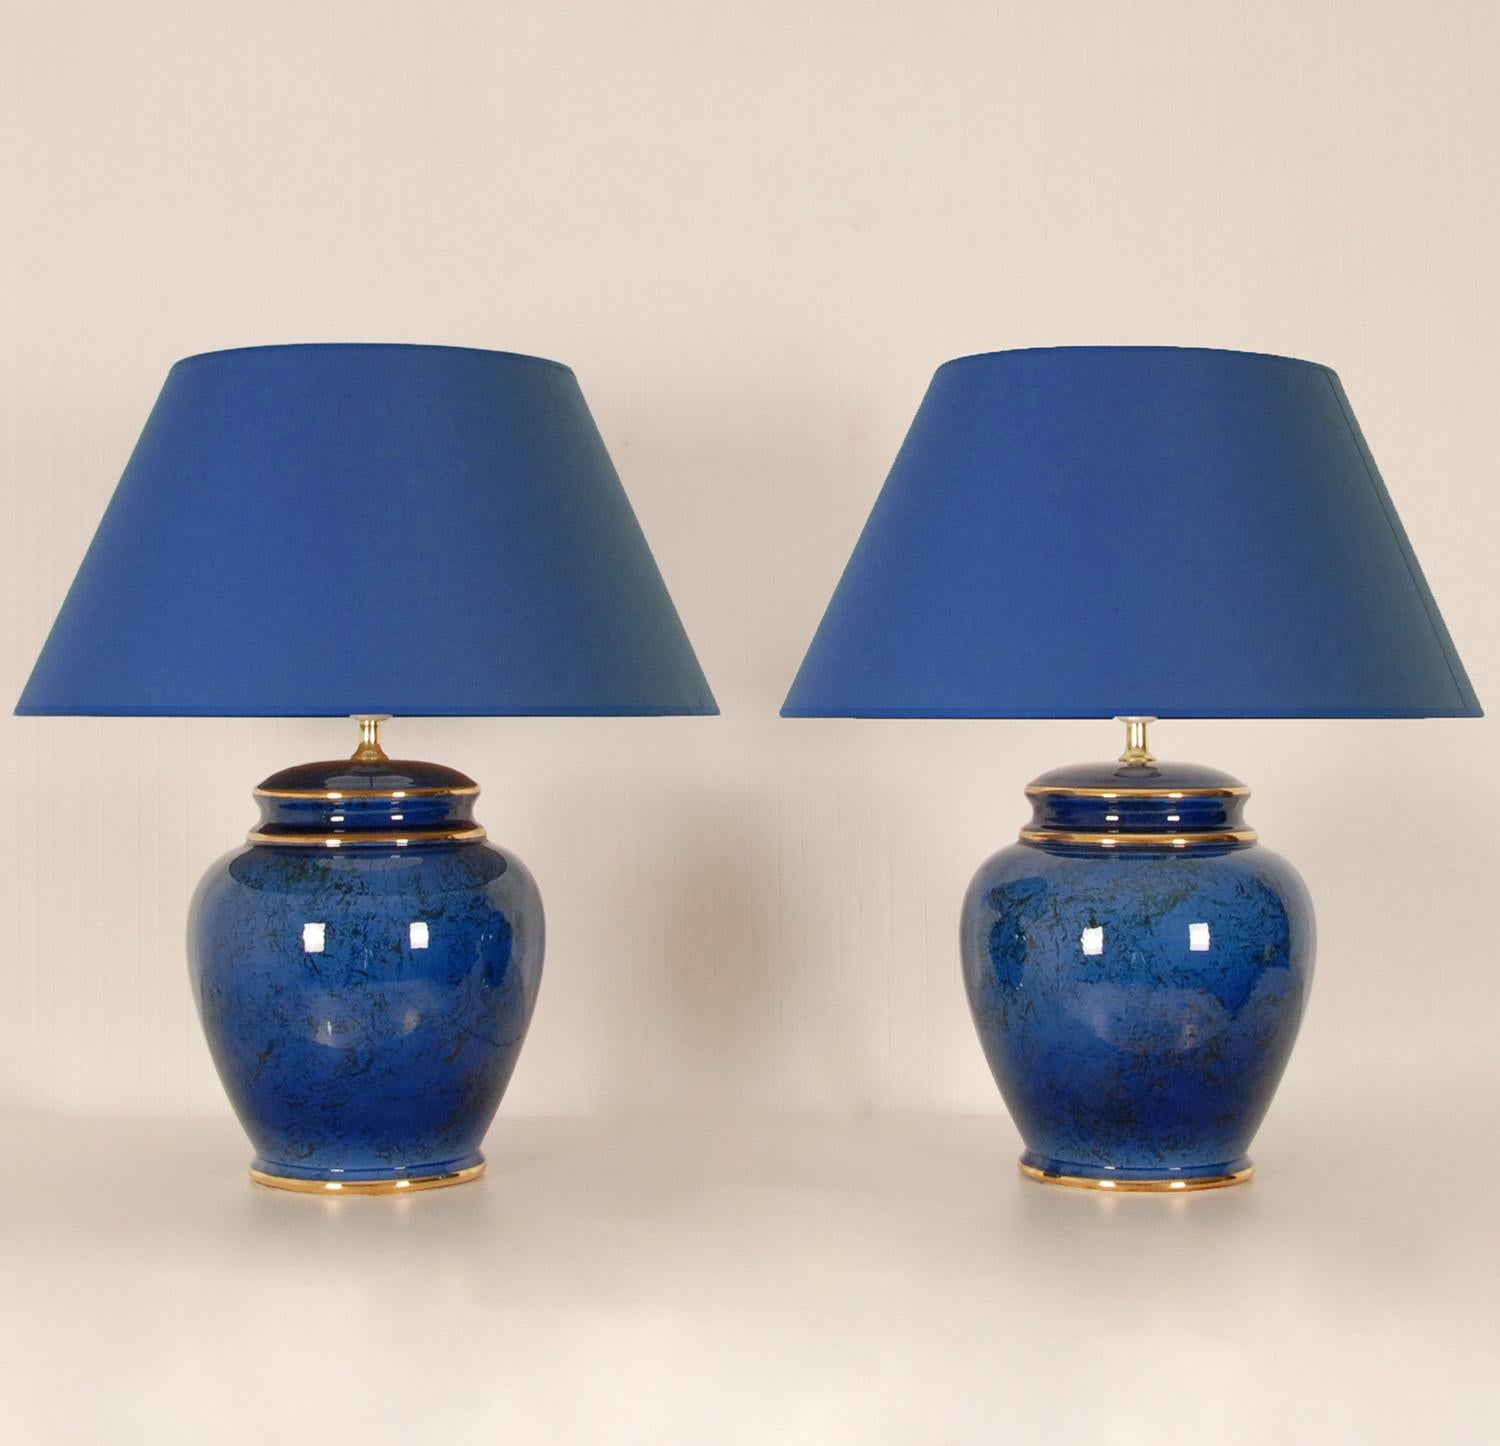 Vintage midcentury chinoiserie Cobalt Blue Ceramic Table Lamps French 1970s - a Pair
Impressive en enchanting blue gold trimmed table lamps.
chinoiserie Lamps inspired by the Chinese oriental ginger jar
Design: In the manner of Robert Kostka,